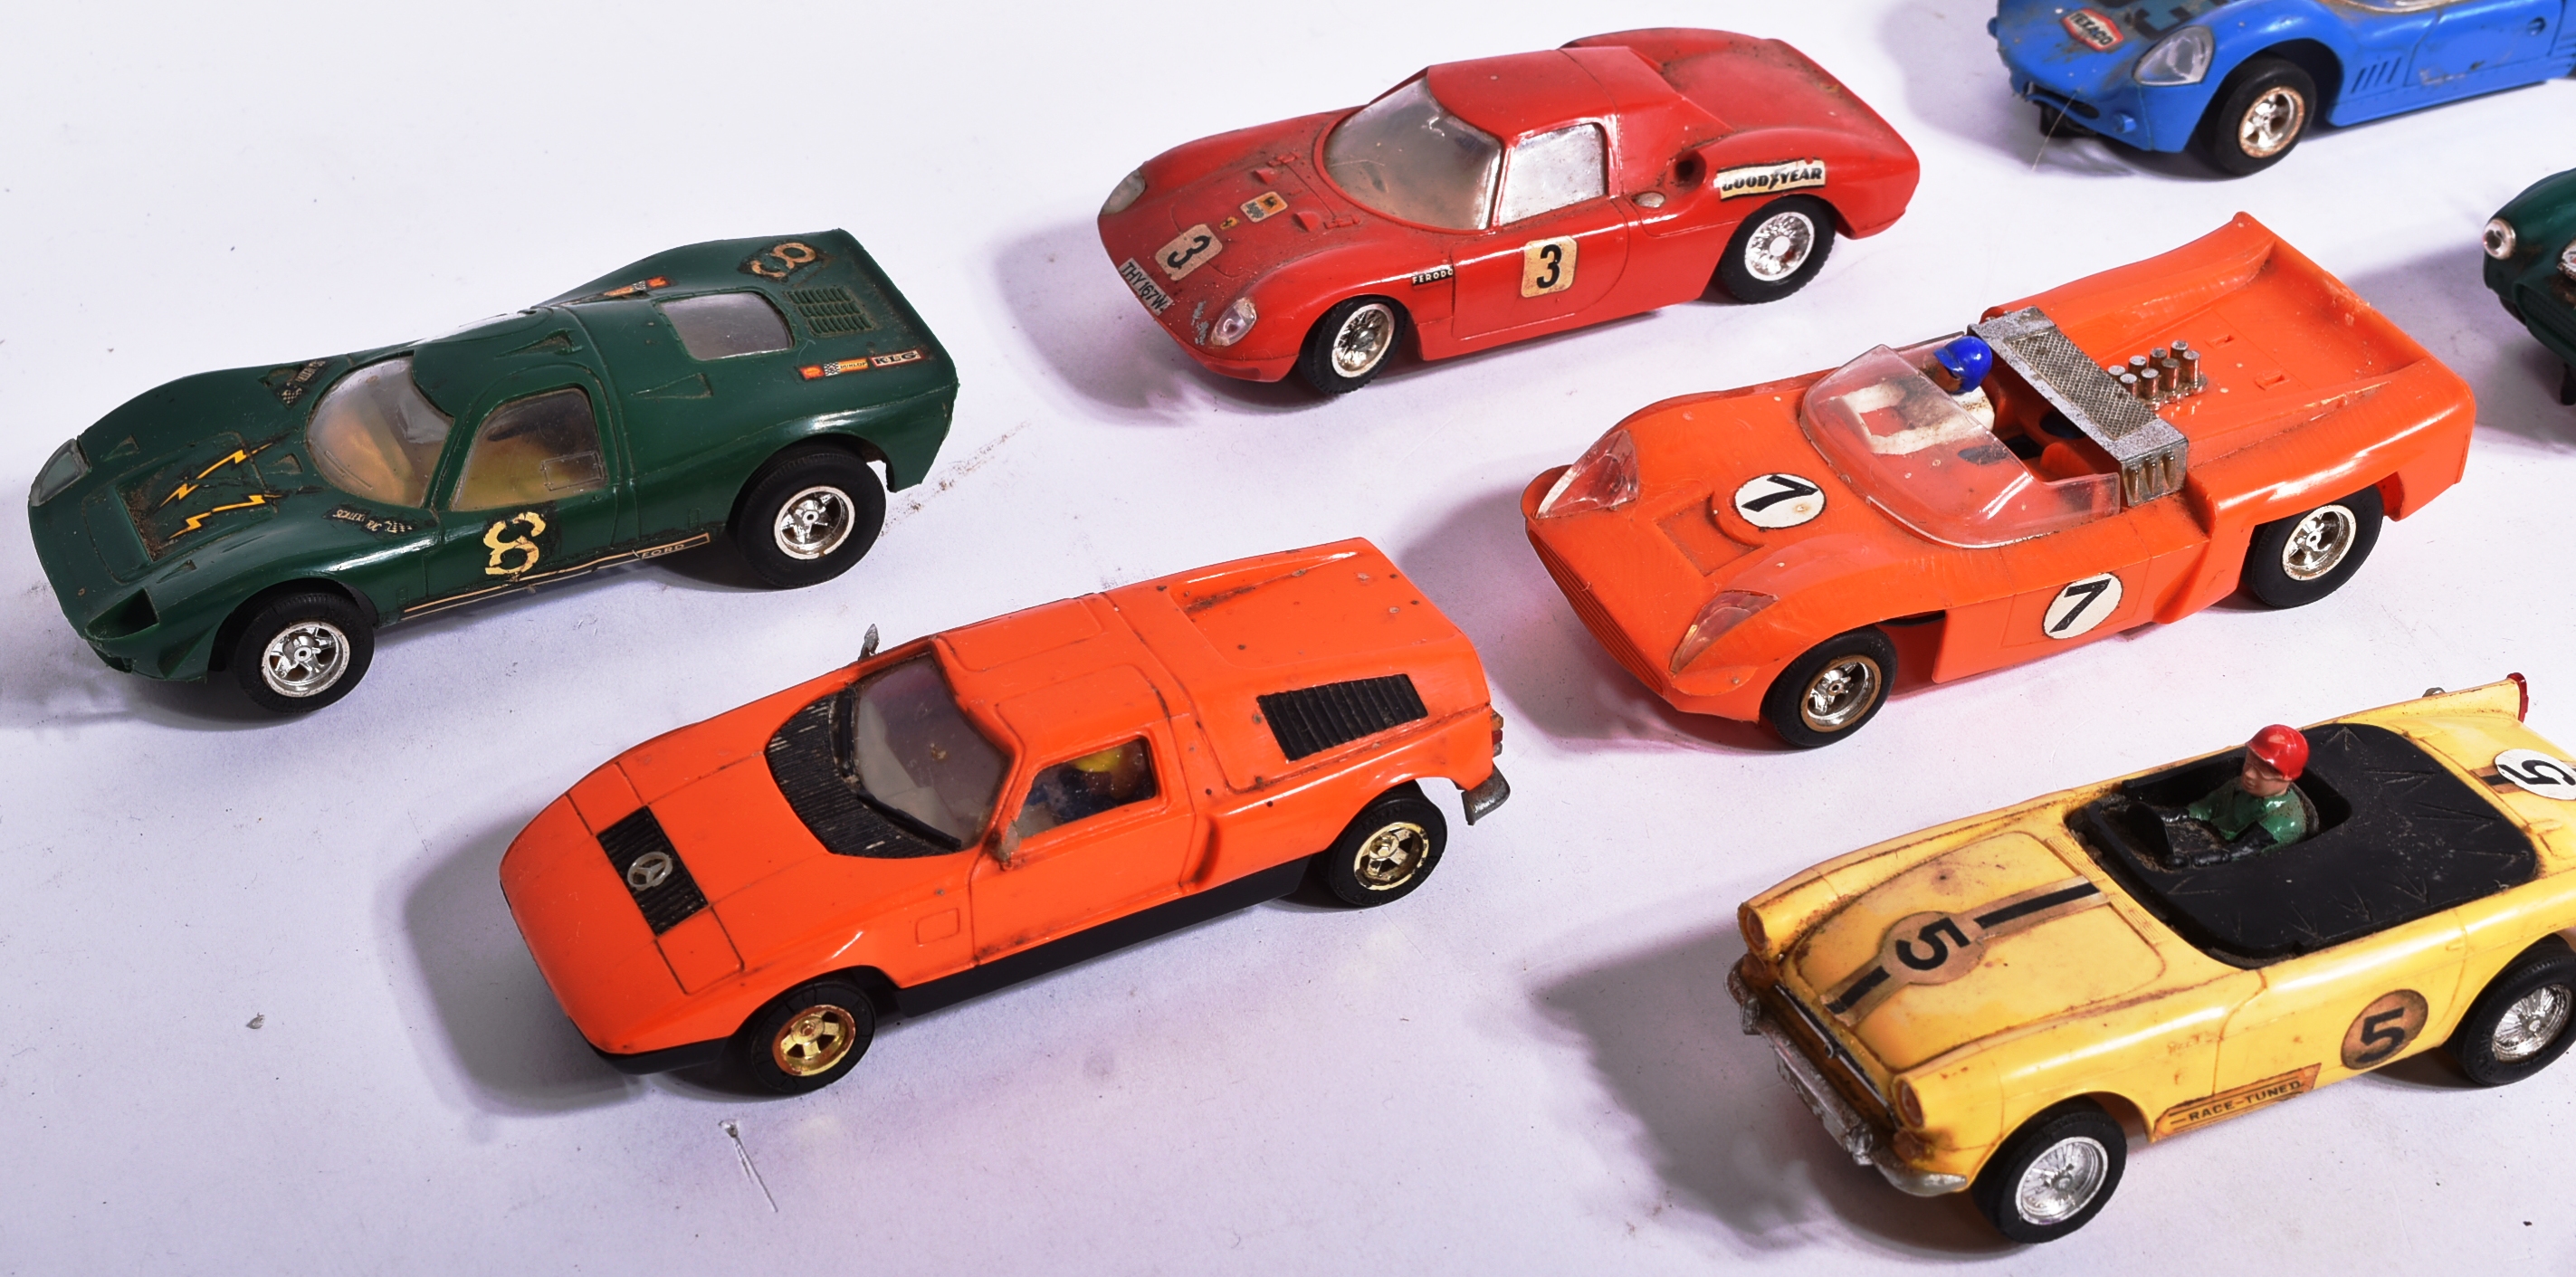 SCALEXTRIC - COLLECTION OF VINTAGE SCALEXTRIC SLOT CARS - Image 4 of 5